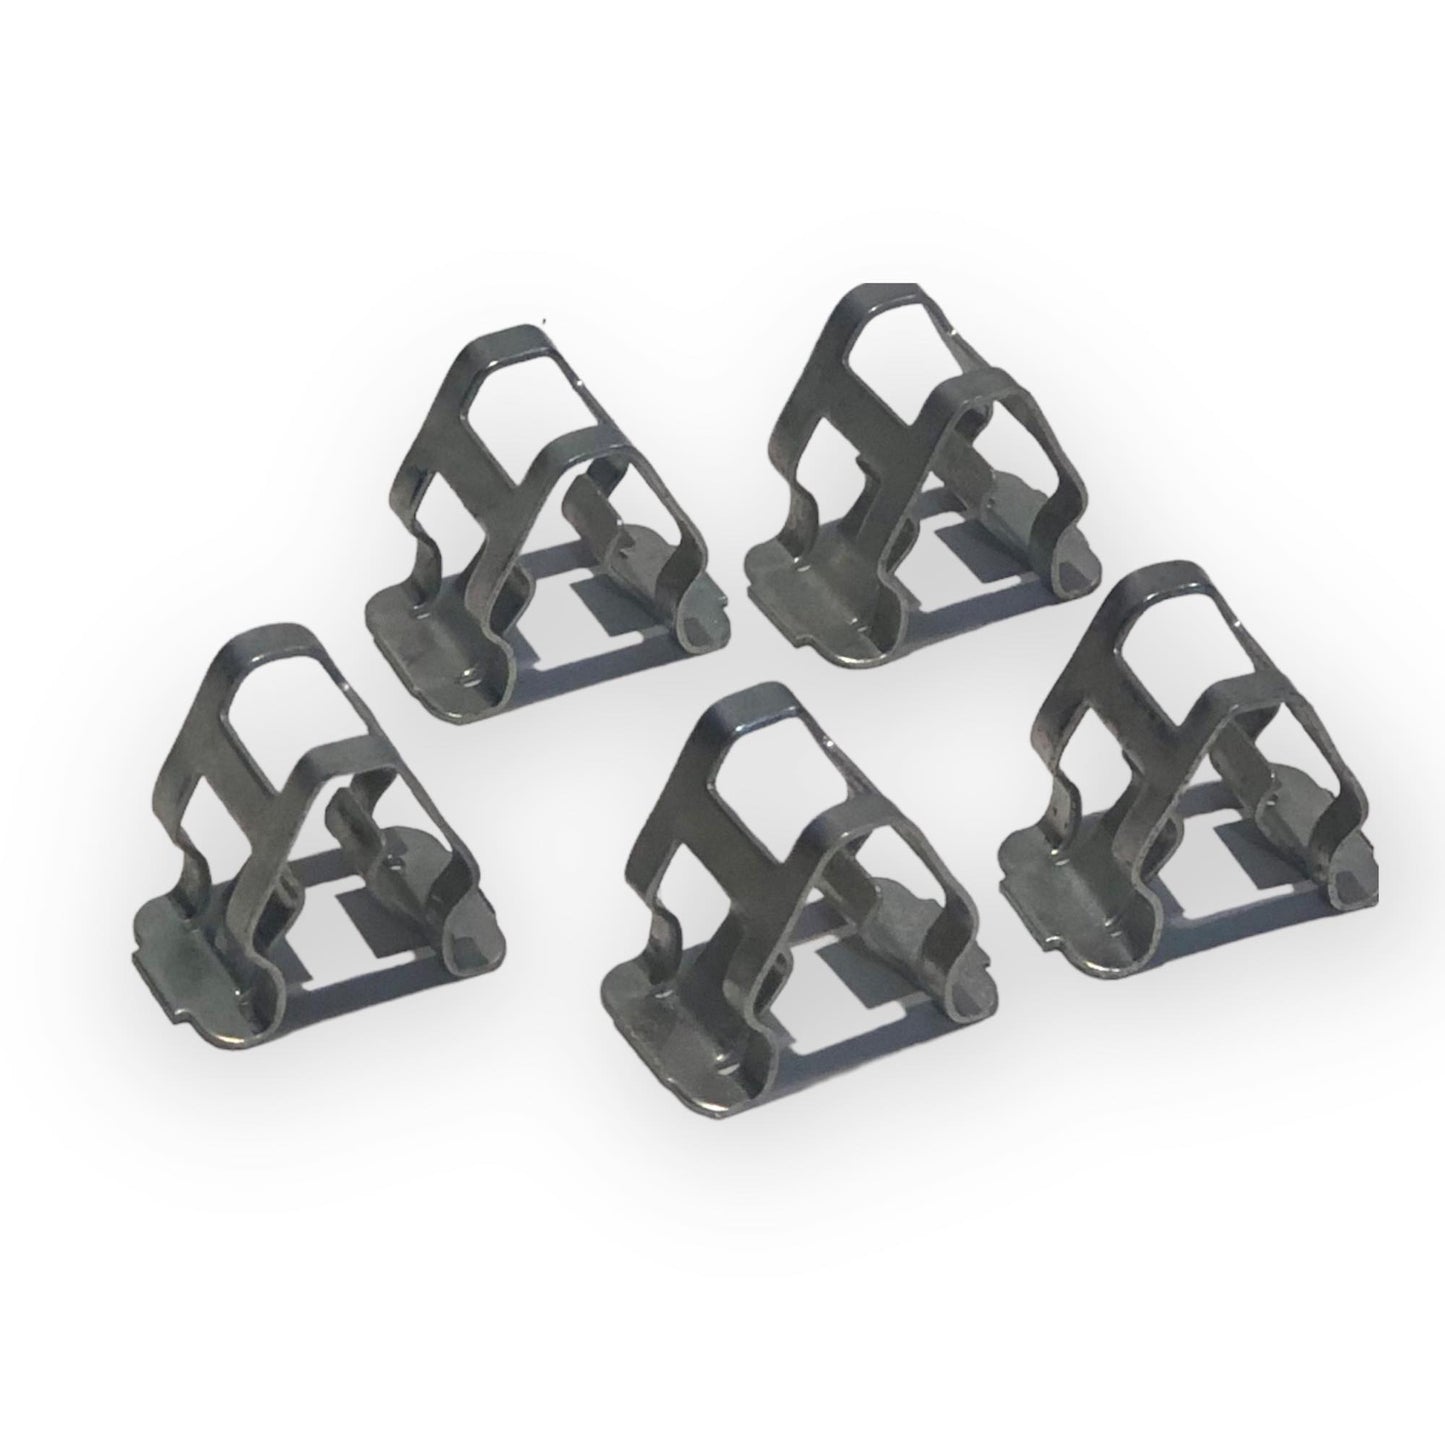 51827544 Trim clip pack of 5 for Fiat 500, Abarth and Lancia Ypsion